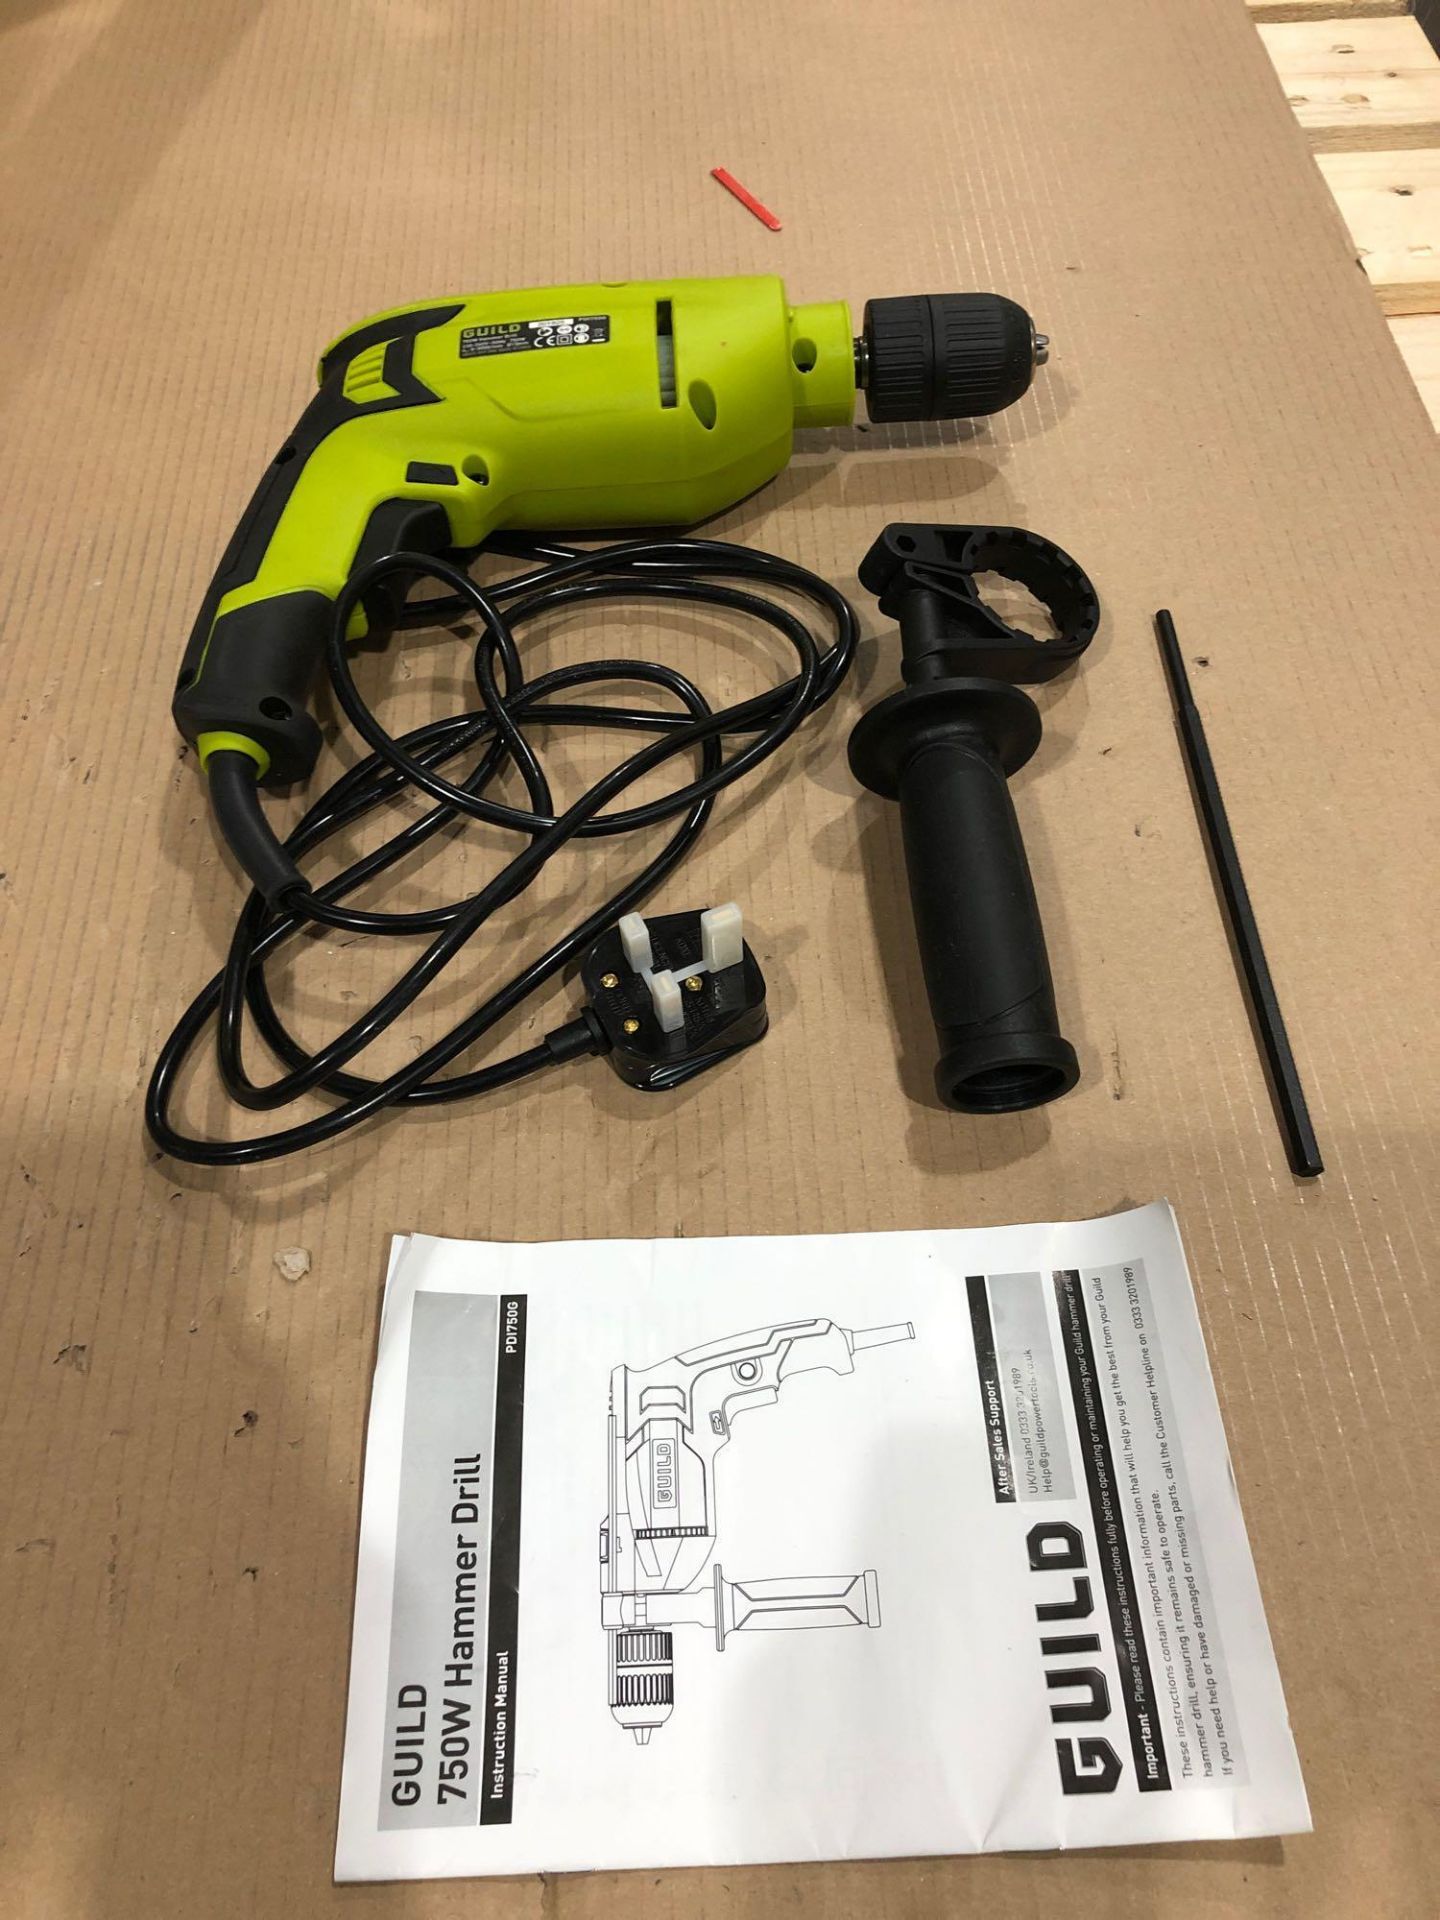 Guild 13mm Keyless High Power Corded Hammer Drill – 750W PDI750G 464/3896 £30.00 RRP - Image 3 of 5